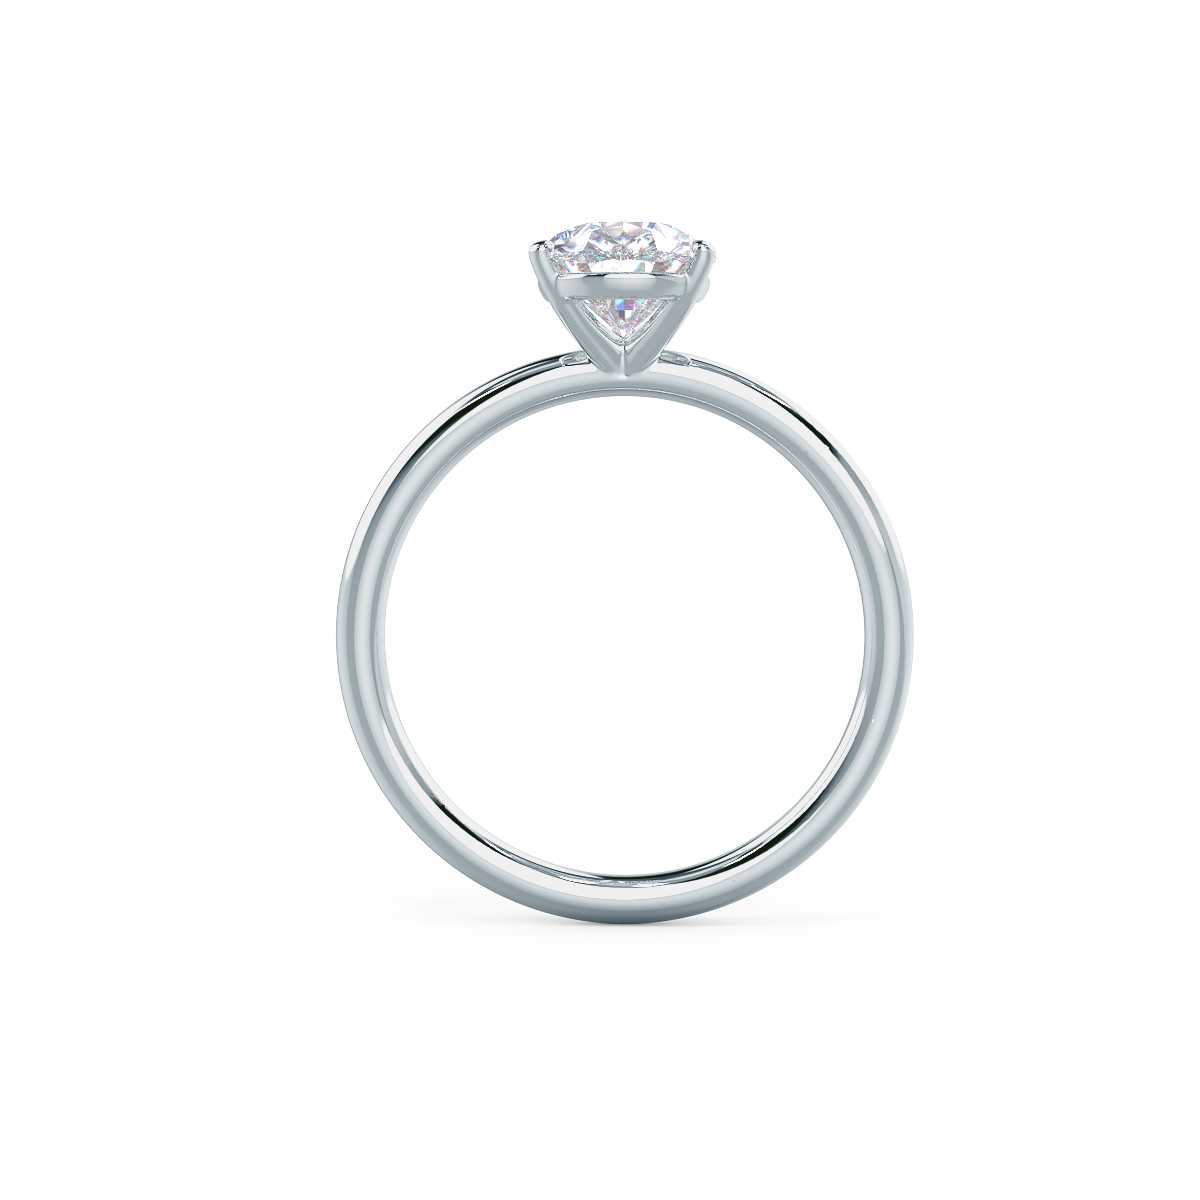 Details about   Simple Solitaire Engagement Ring 3.00 CT Pear Cut Diamond 14K White Gold Finish 